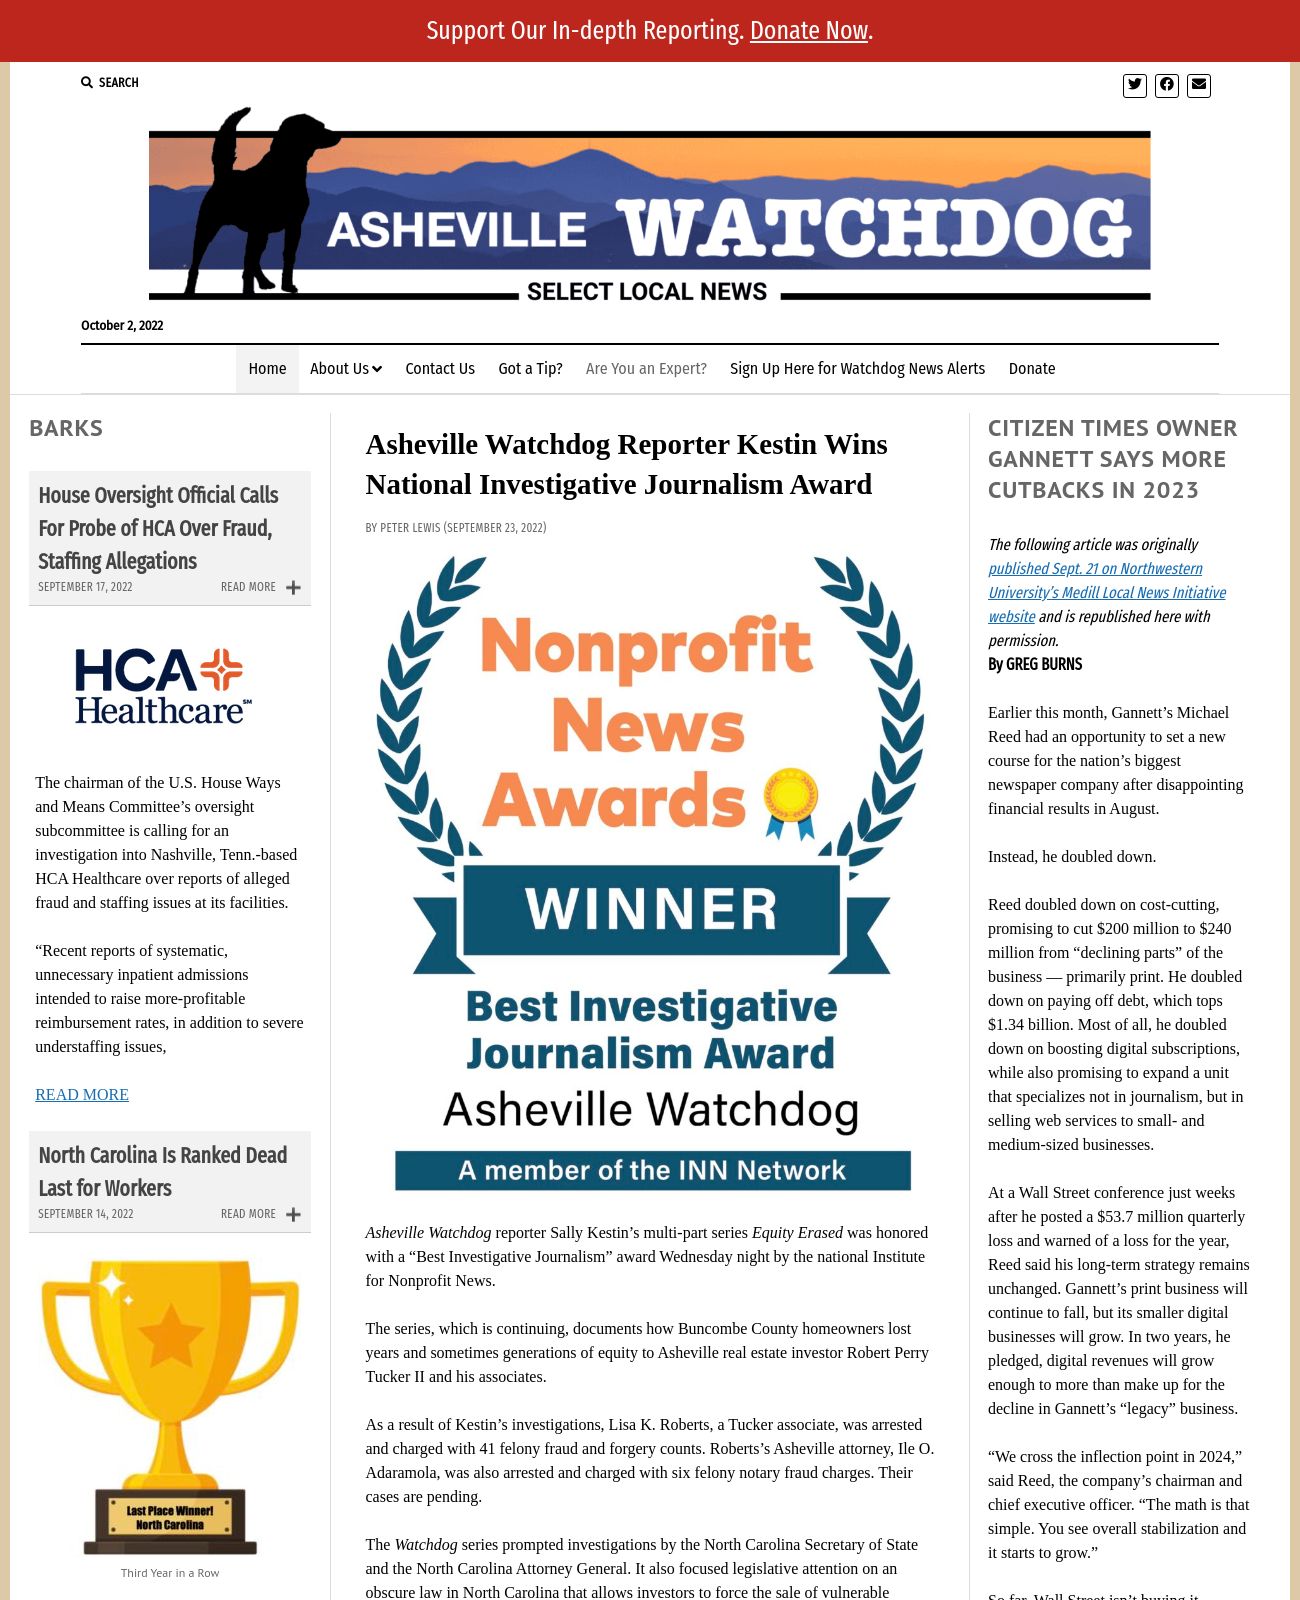 Asheville Watchdog at 2022-10-02 19:01:00-04:00 local time